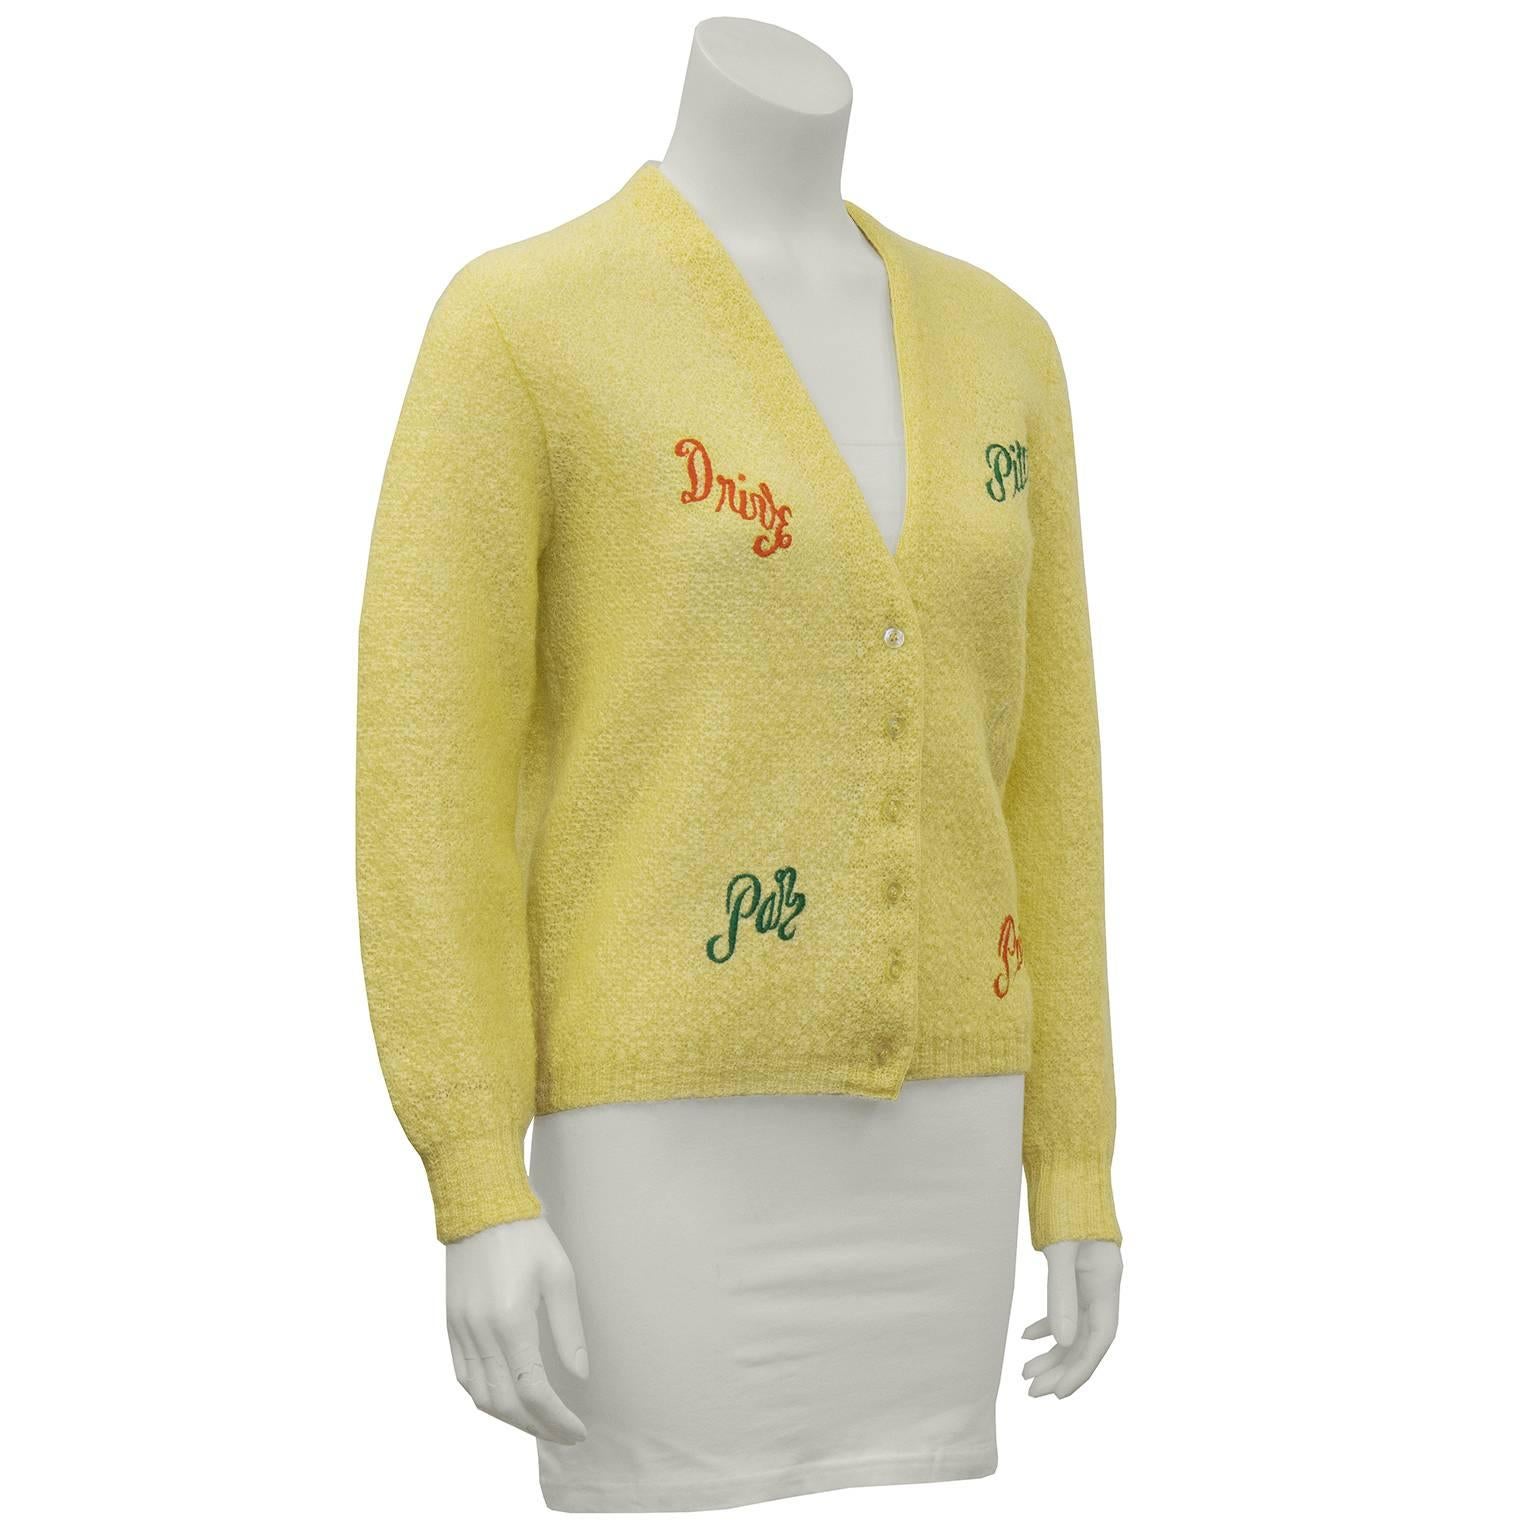 Fantastic ladies novelty golf cardigan circa 1950 with embroidered golf themed  decals positioned tastefully on the front. The perfect piece for the fashionable golfer who dresses to impress. Made for Saks 5th Ave, Active Sportswear Line. Excellent